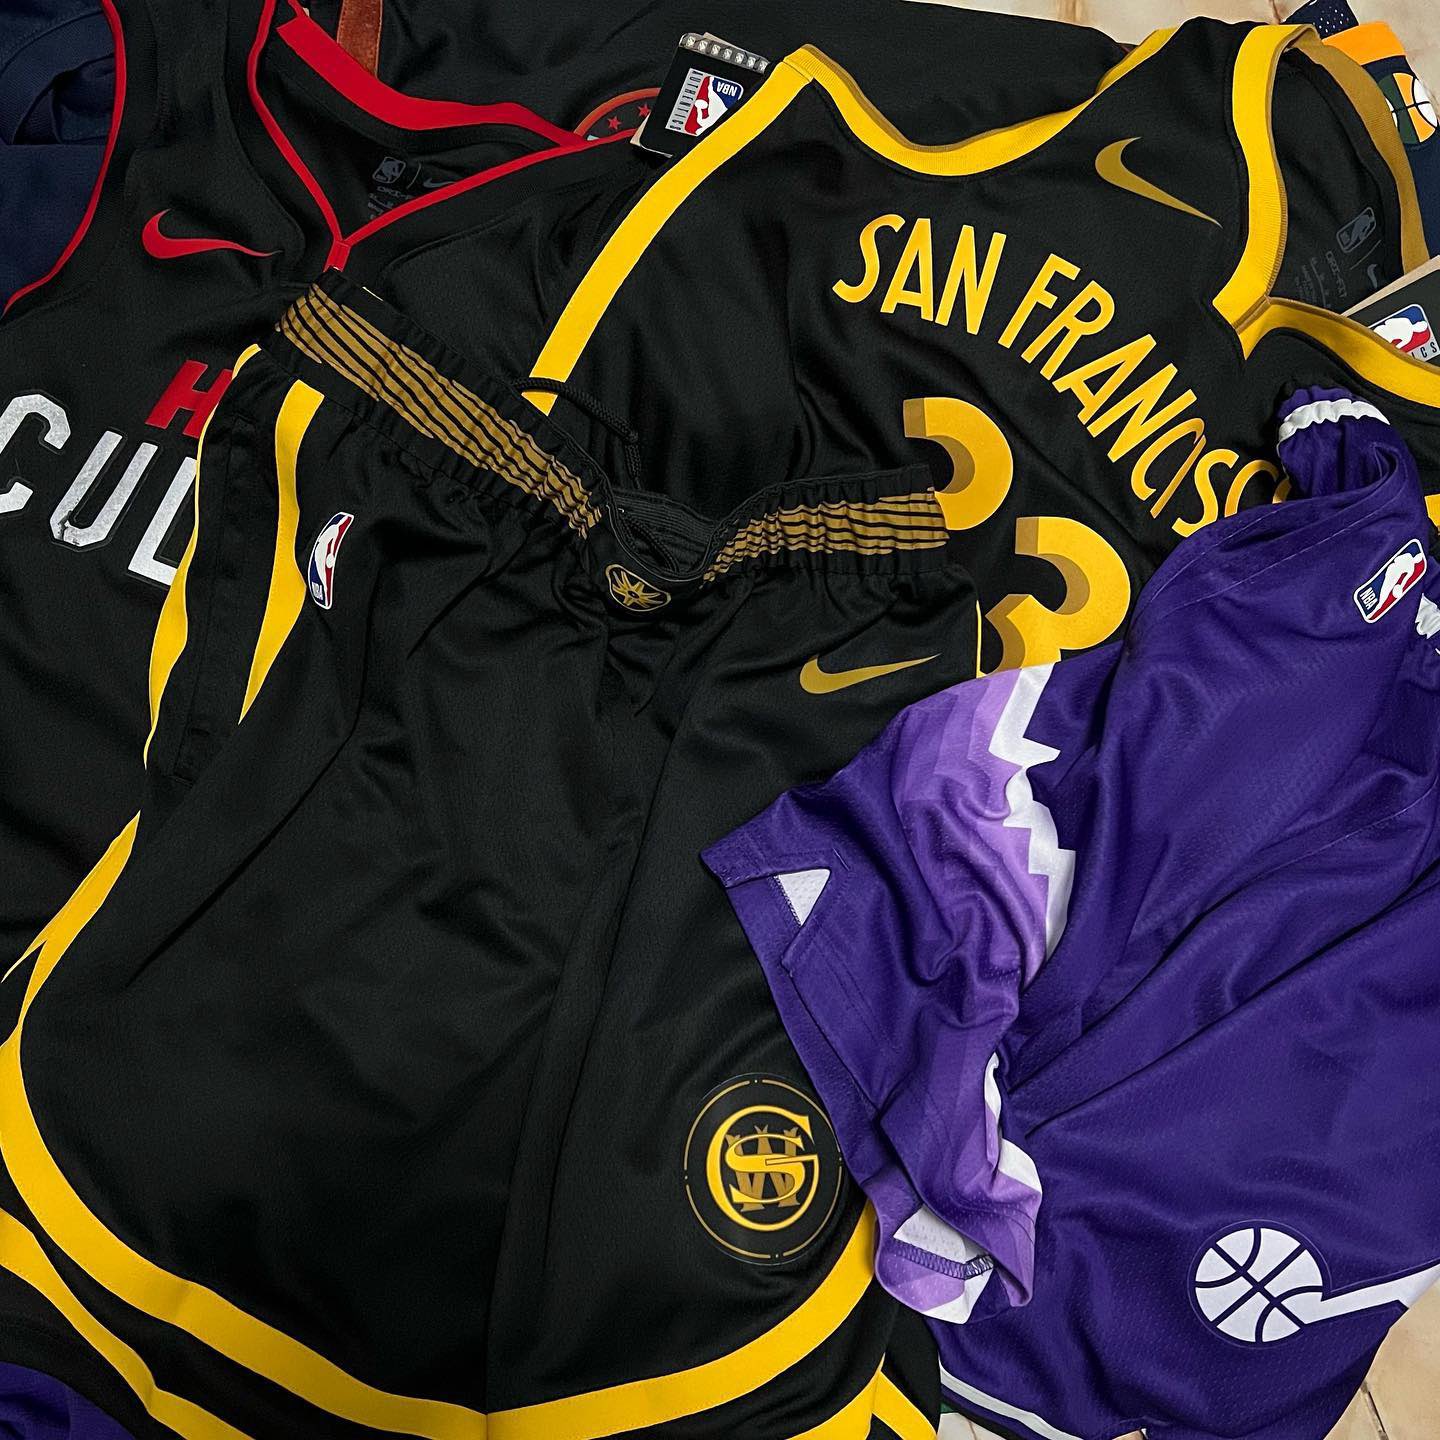 NBA Buzz - NBA 2K leaked the upcoming City uniforms by